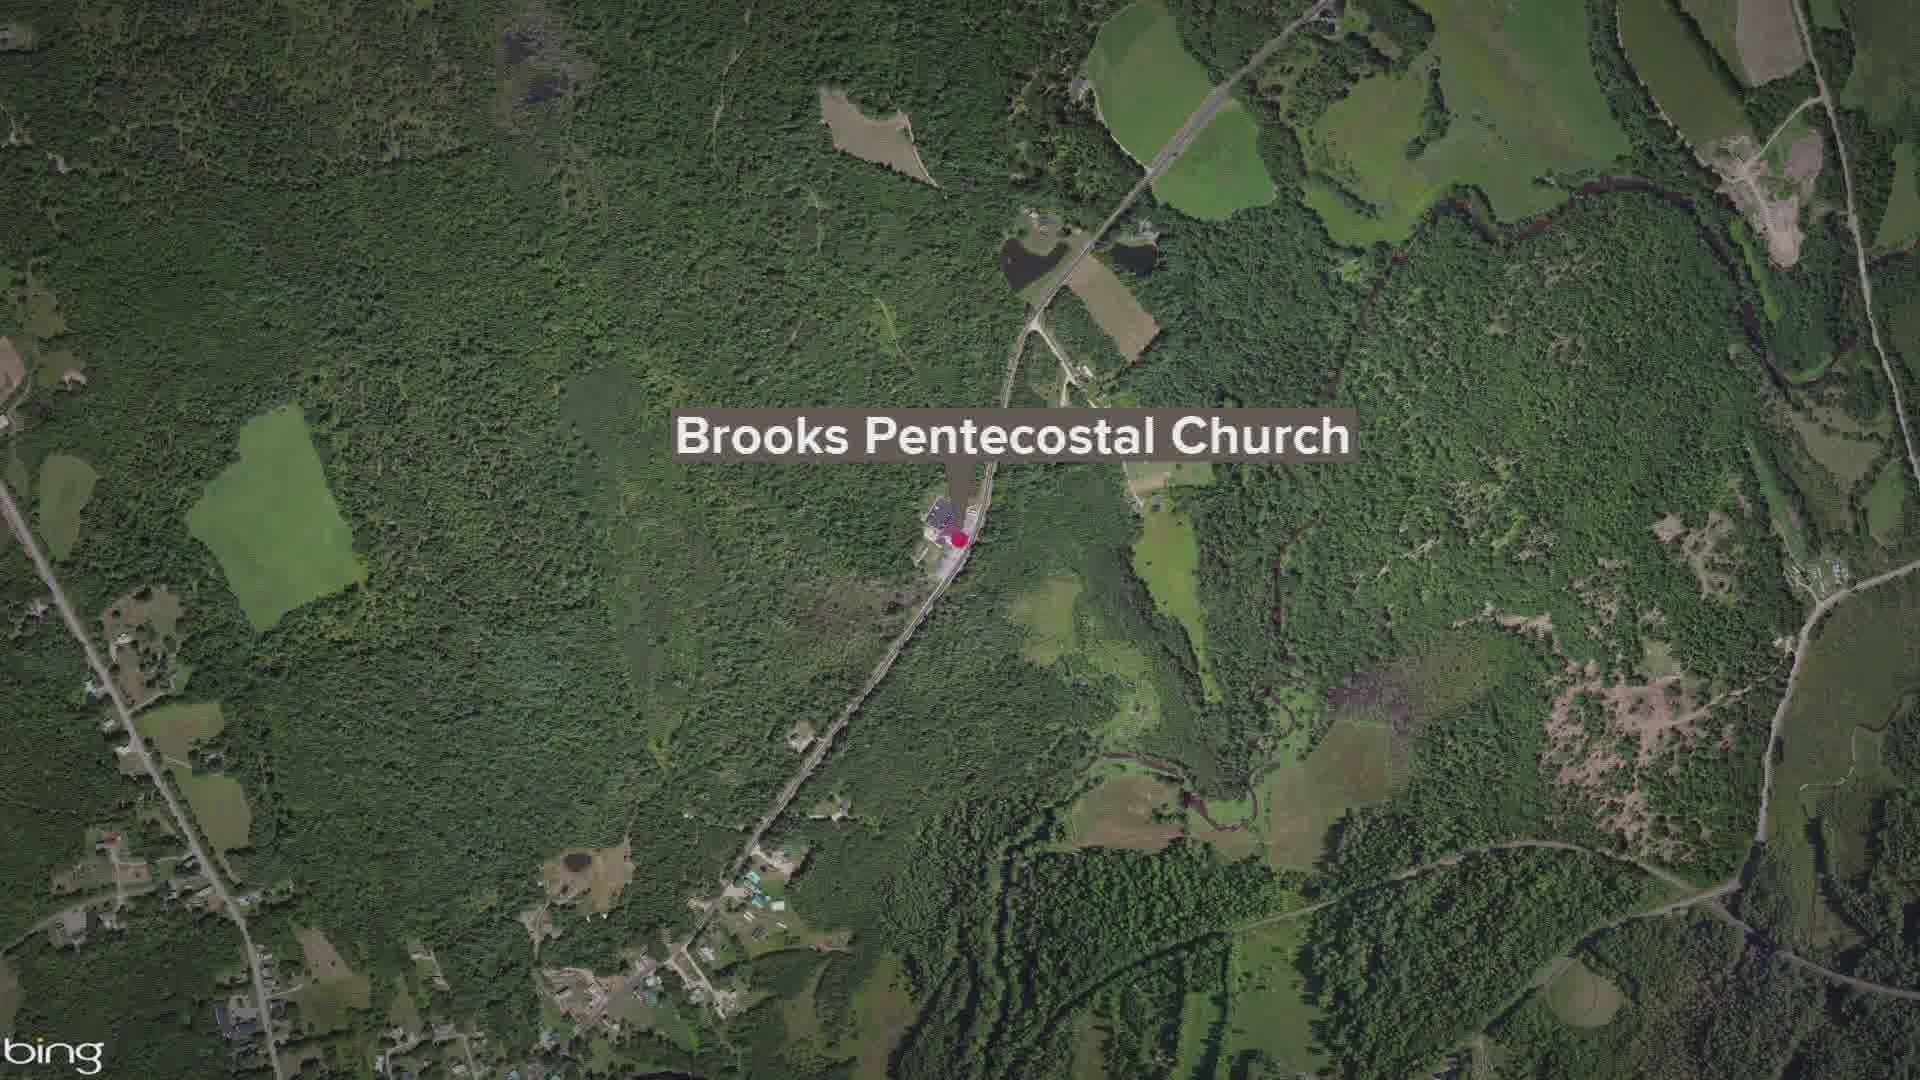 Officials say anyone who spent time at Brooks Pentecostal Church should monitor themselves.